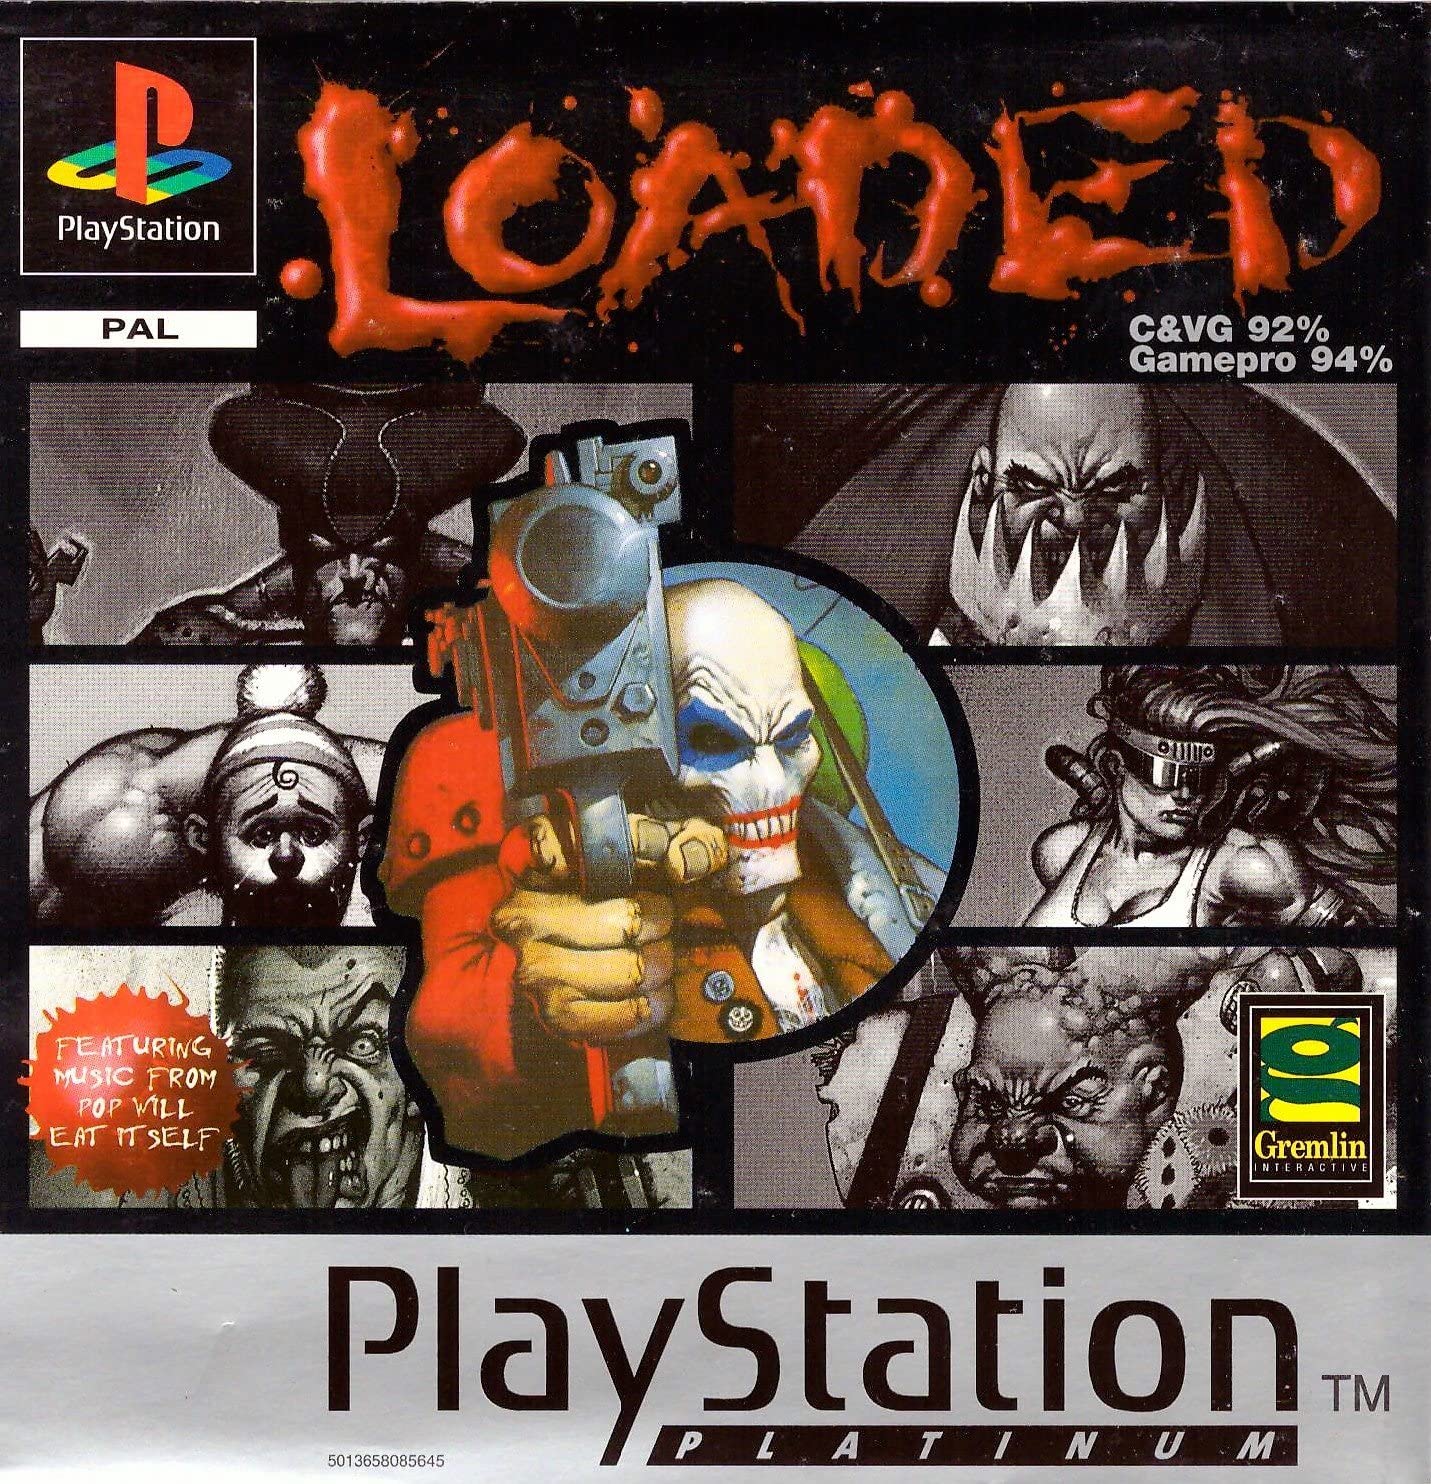 Game | Sony Playstation PS1 | Loaded [Platinum]